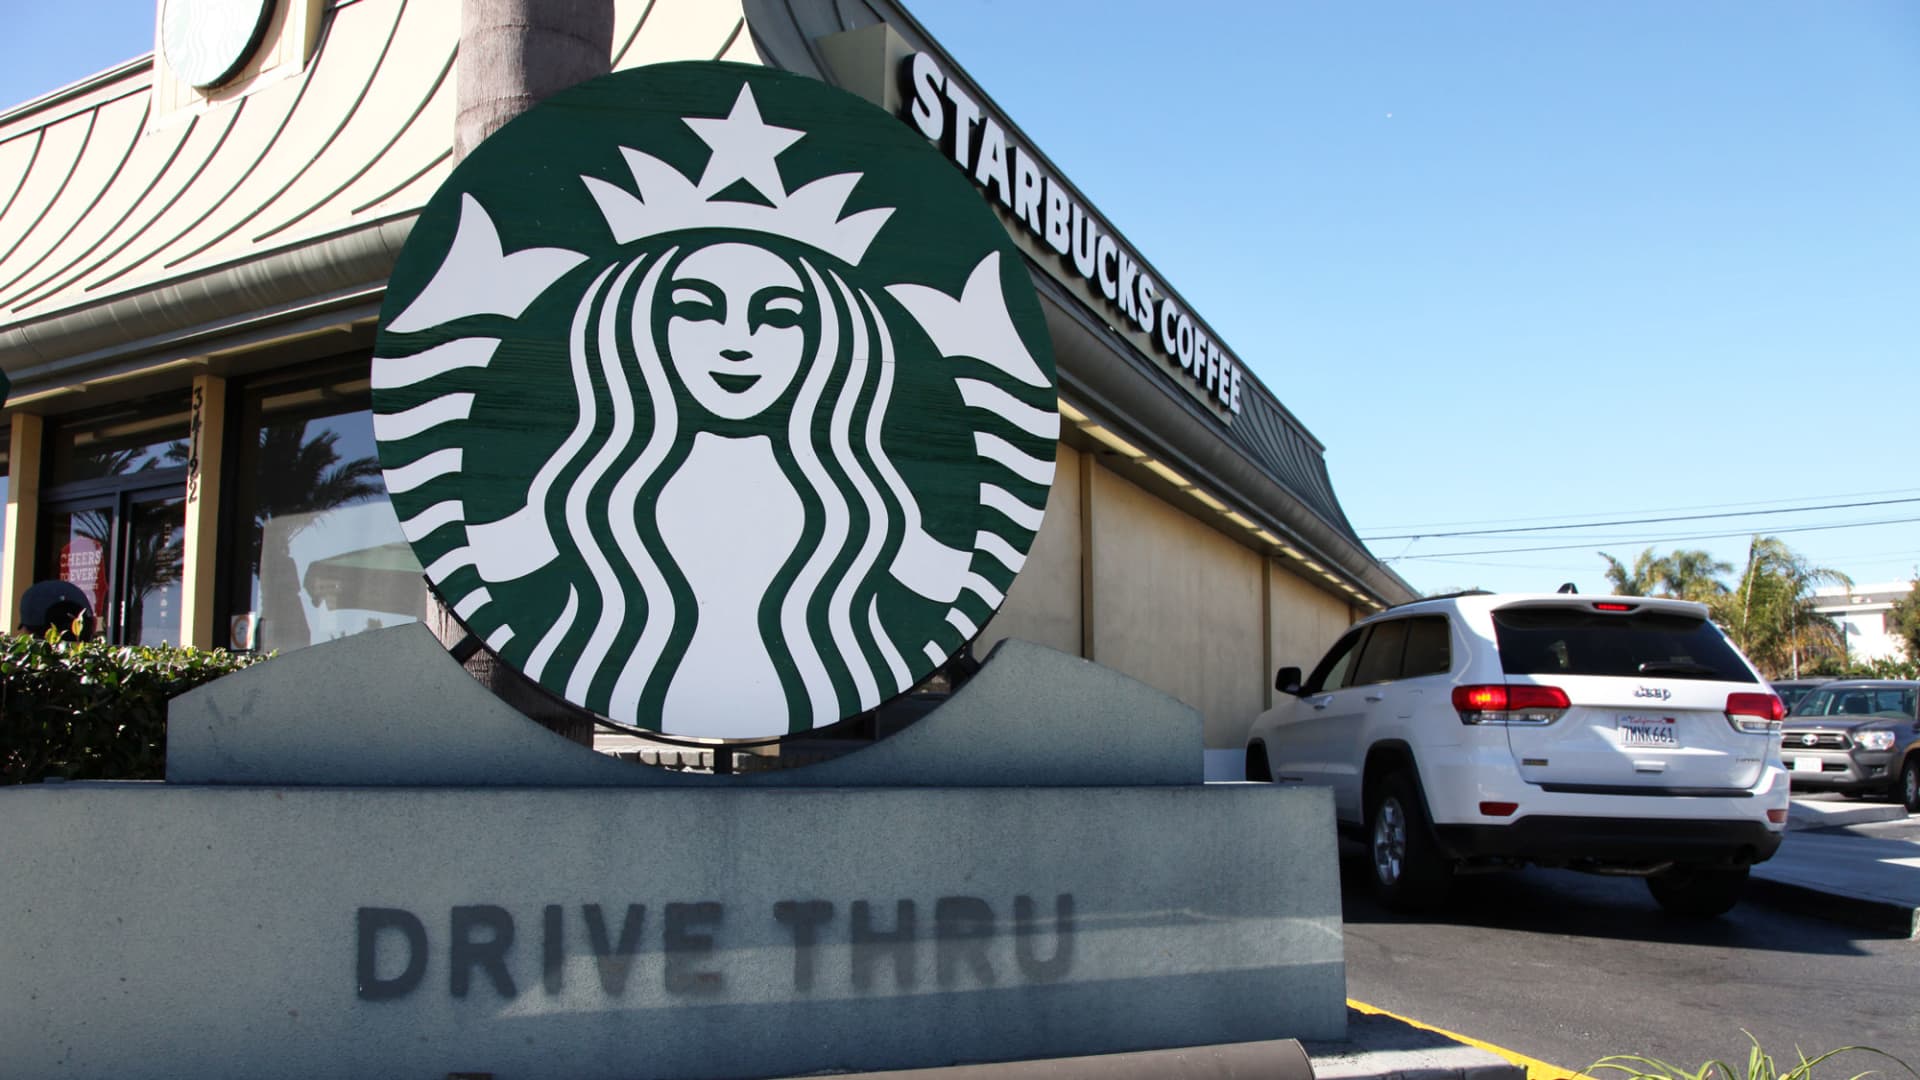 How Starbucks could boost profits by putting AI chatbots at its drive-thru windows